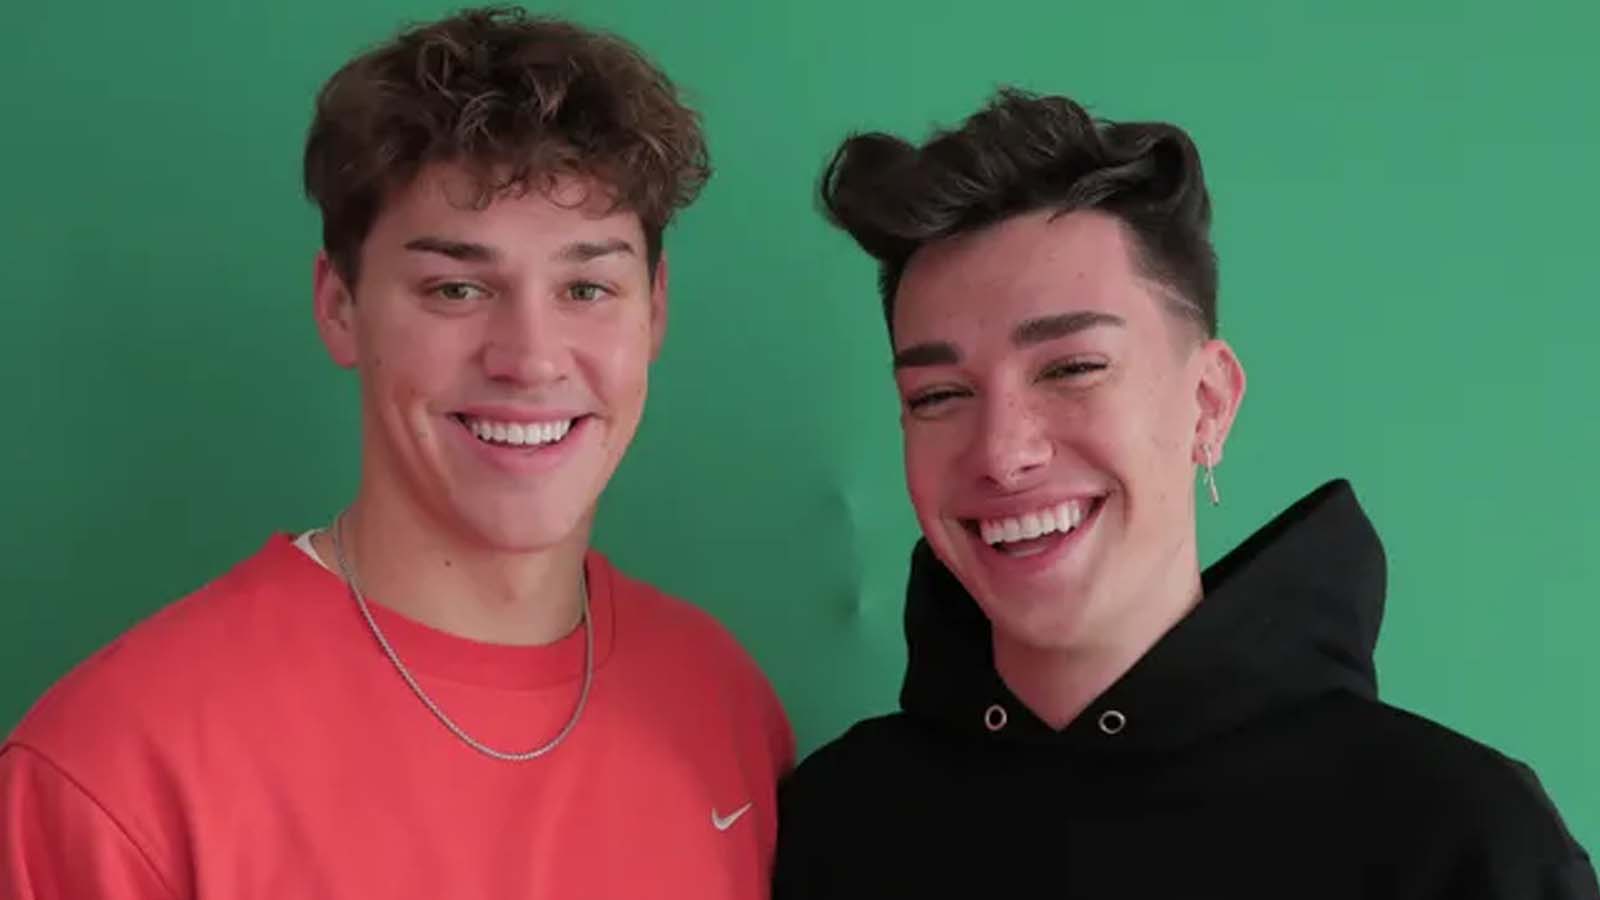 Noah Beck slams “close-minded” people who tried to cancel James Charles